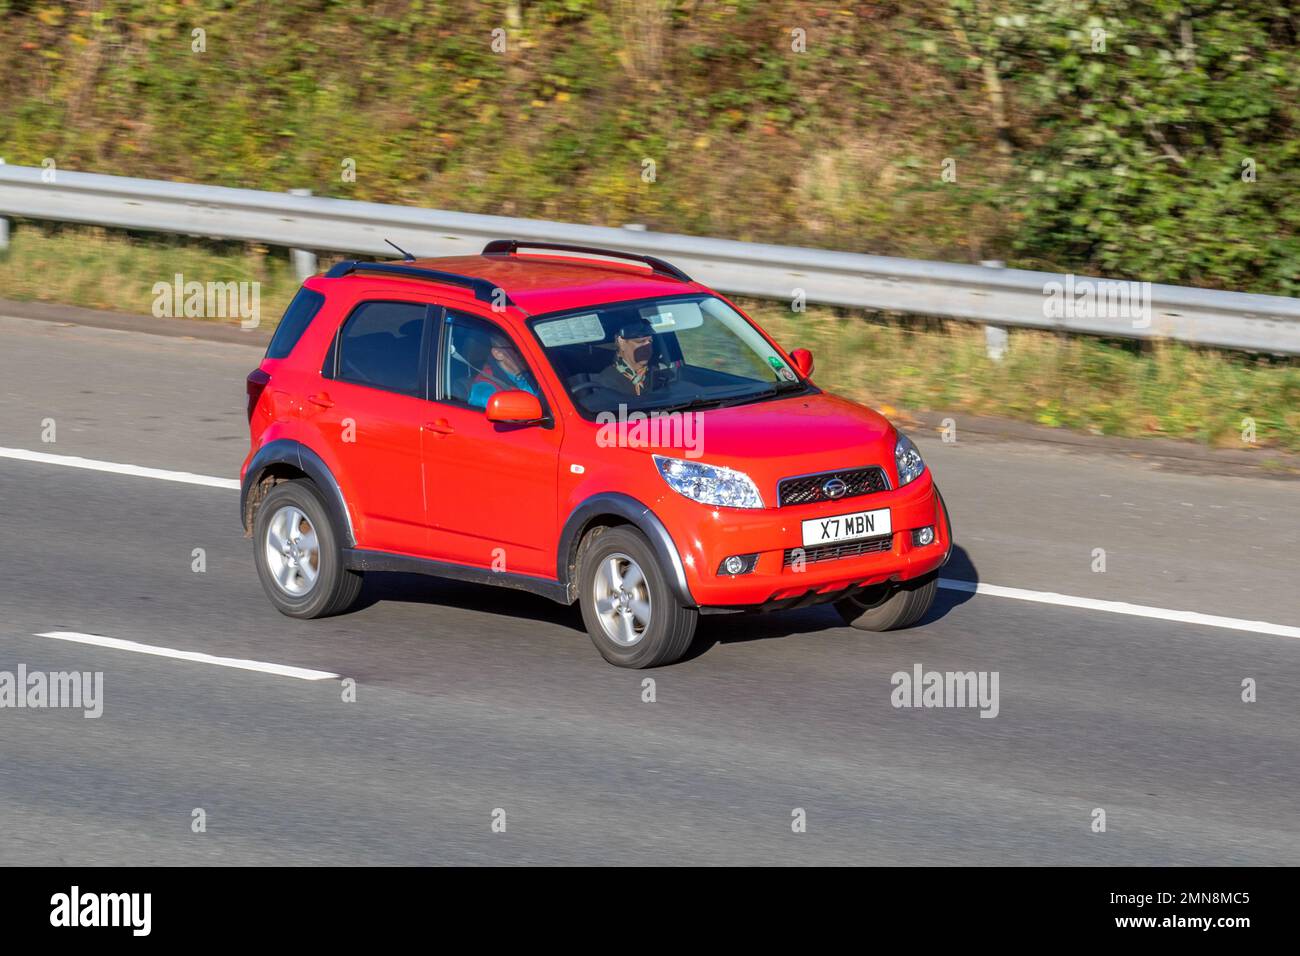 2008 Red DAIHATSU TERIOS 1495cc Petrol 5 speed manual a mini SUV produced by the Japanese automobile manufacturer Daihatsu since 1997 as the successor to the F300 series Rocky; Stock Photo